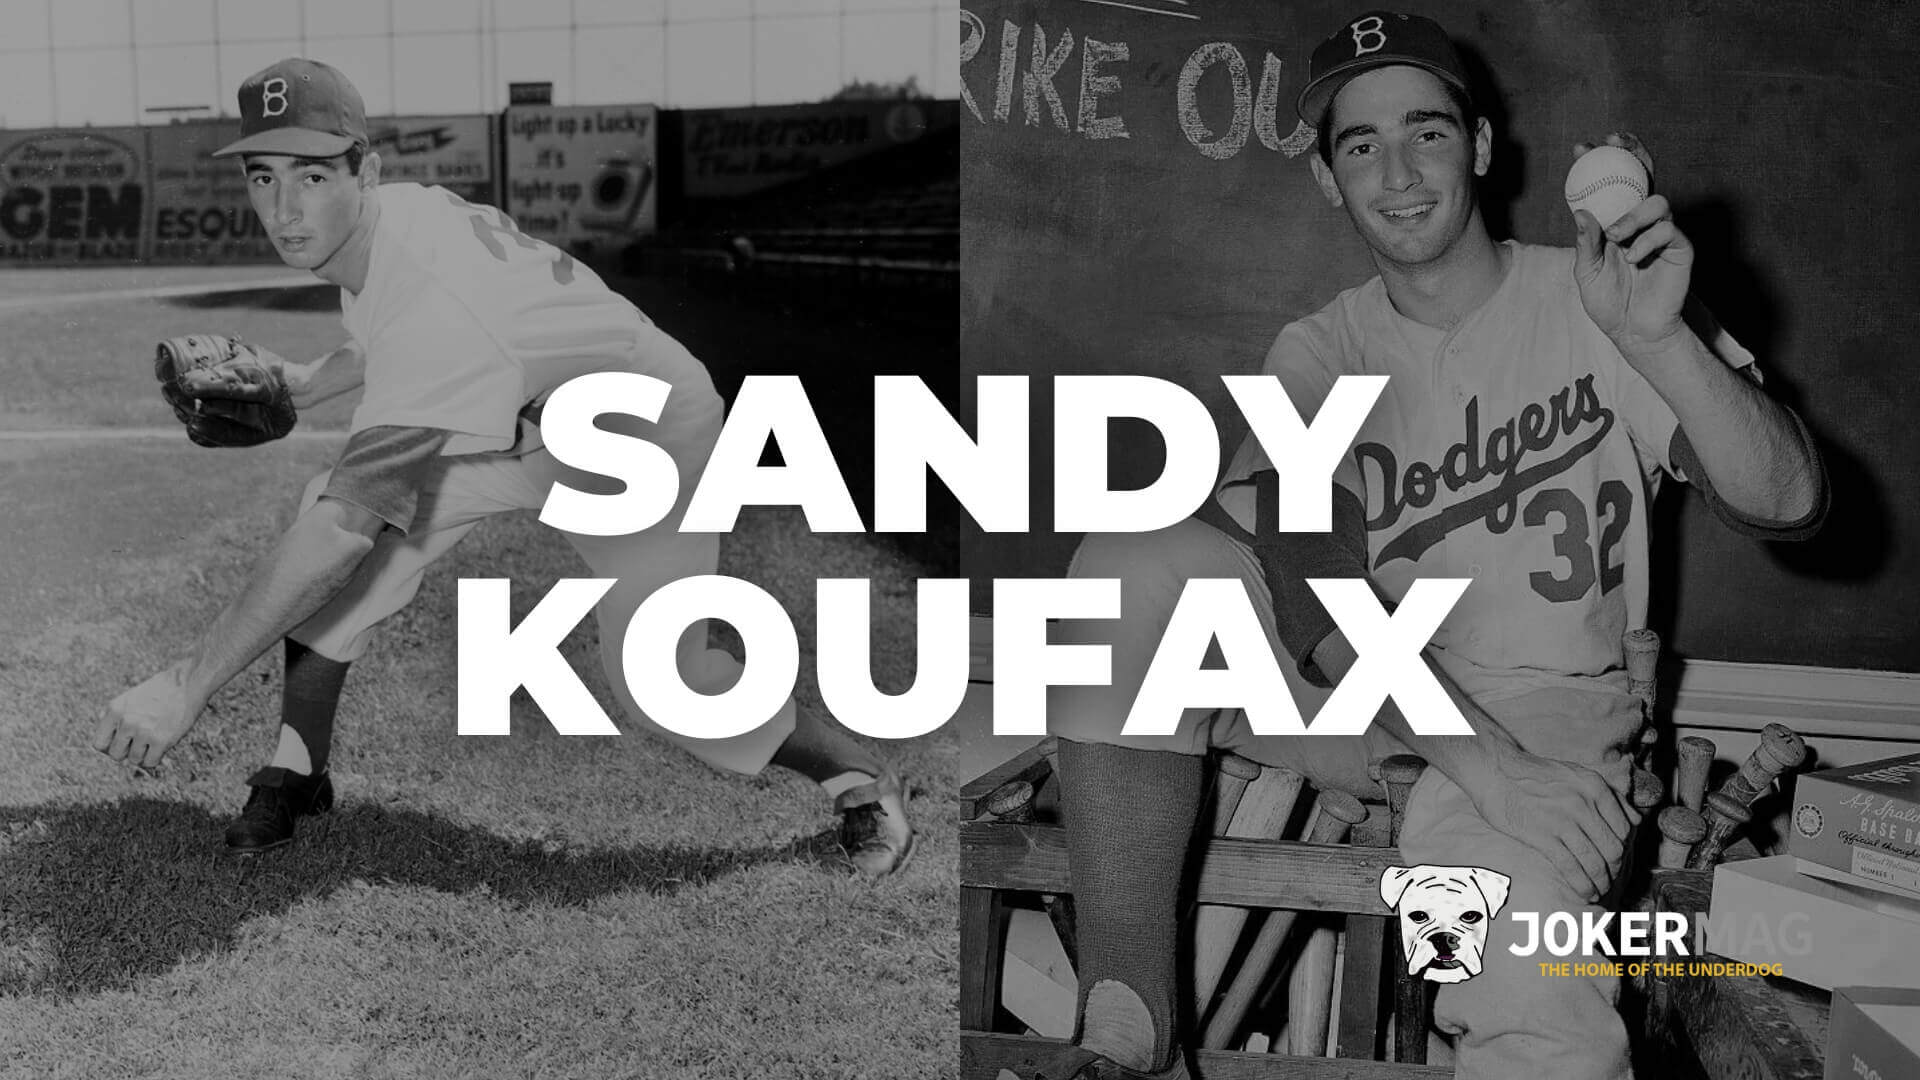 Sandy Koufax turned his career around after almost quitting baseball in 1960